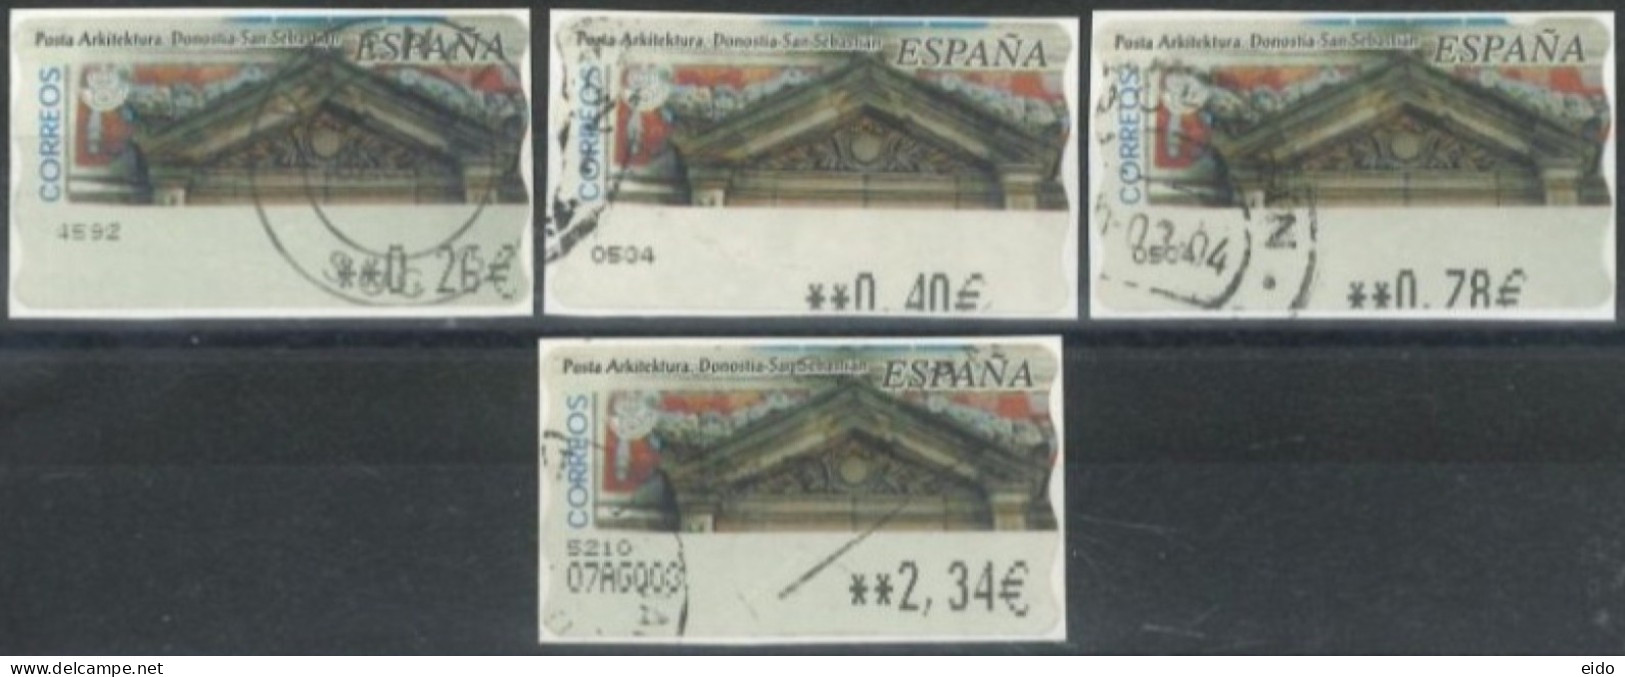 SPAIN- 2004, SAN SABASTIAN ARCHITECTURE STAMPS LABELS SET OF 4, DIFFERENT VALUES, USED. - Usados